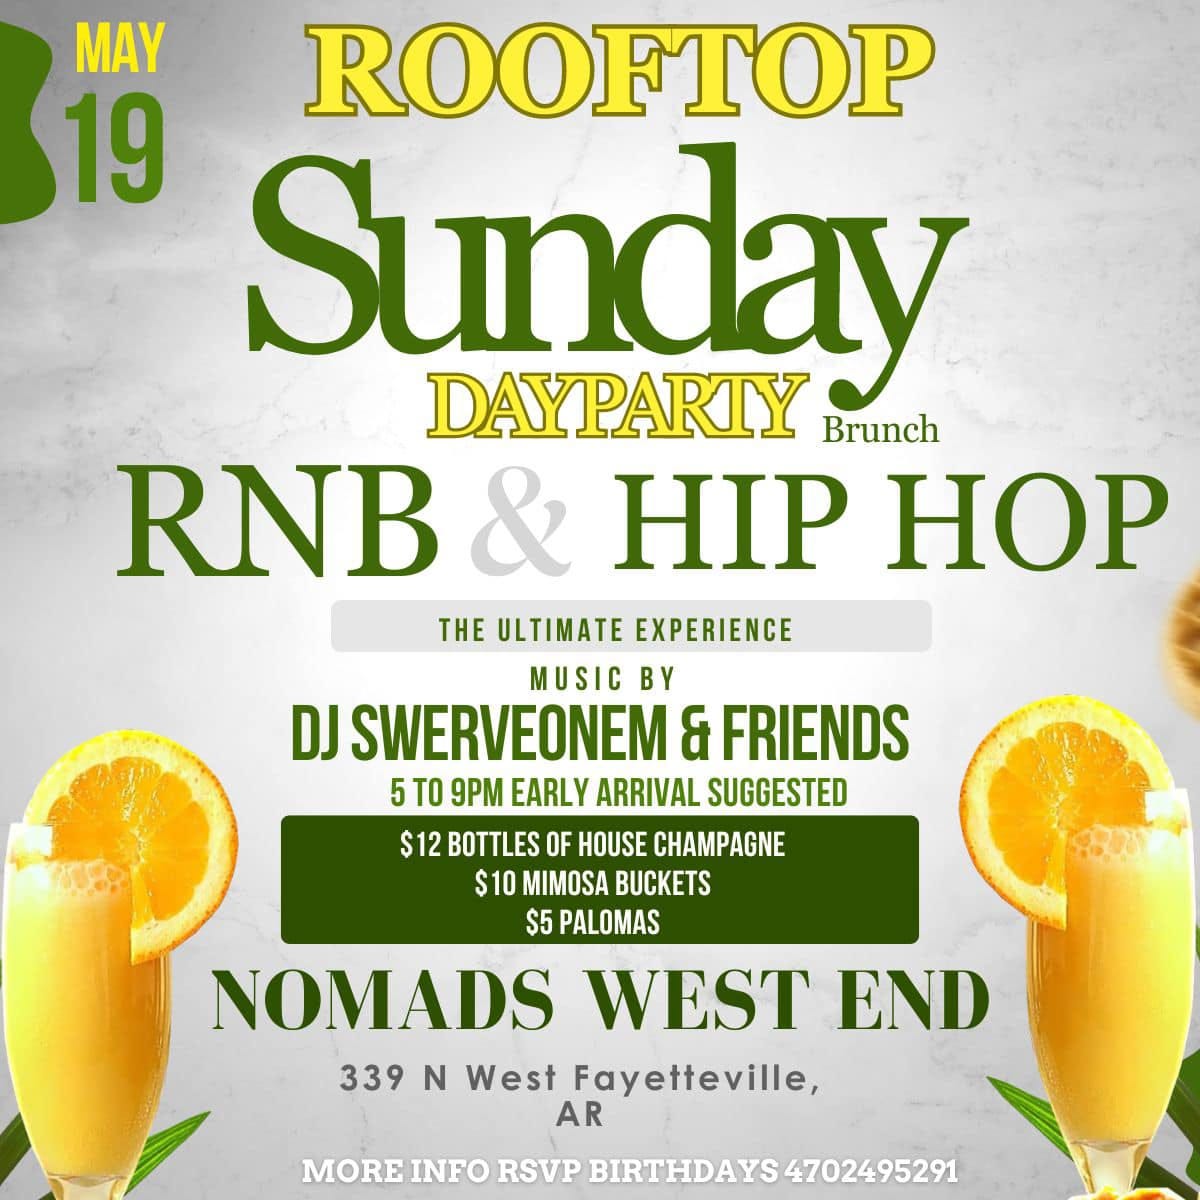 May be an image of text that says 'MAY ROOFTOP 19 Sunday DAYPARTY Brunch RNB HIP HOP THE ULTIMATE EXPERIENCE MUSIC By DJ SWERVEONEM & FRIENDS 5 TO 9PM EARLY ARRIVAL SUGGESTED $12 BOTTLES OF HOUSE CHAMPAGNE $10 MIMOSA BUCKETS $5 PALOMAS NOMADS WEST END 339 N West Fayetteville, AR MORE INFO RSVP BIRTHDAYS AYS4702495291'